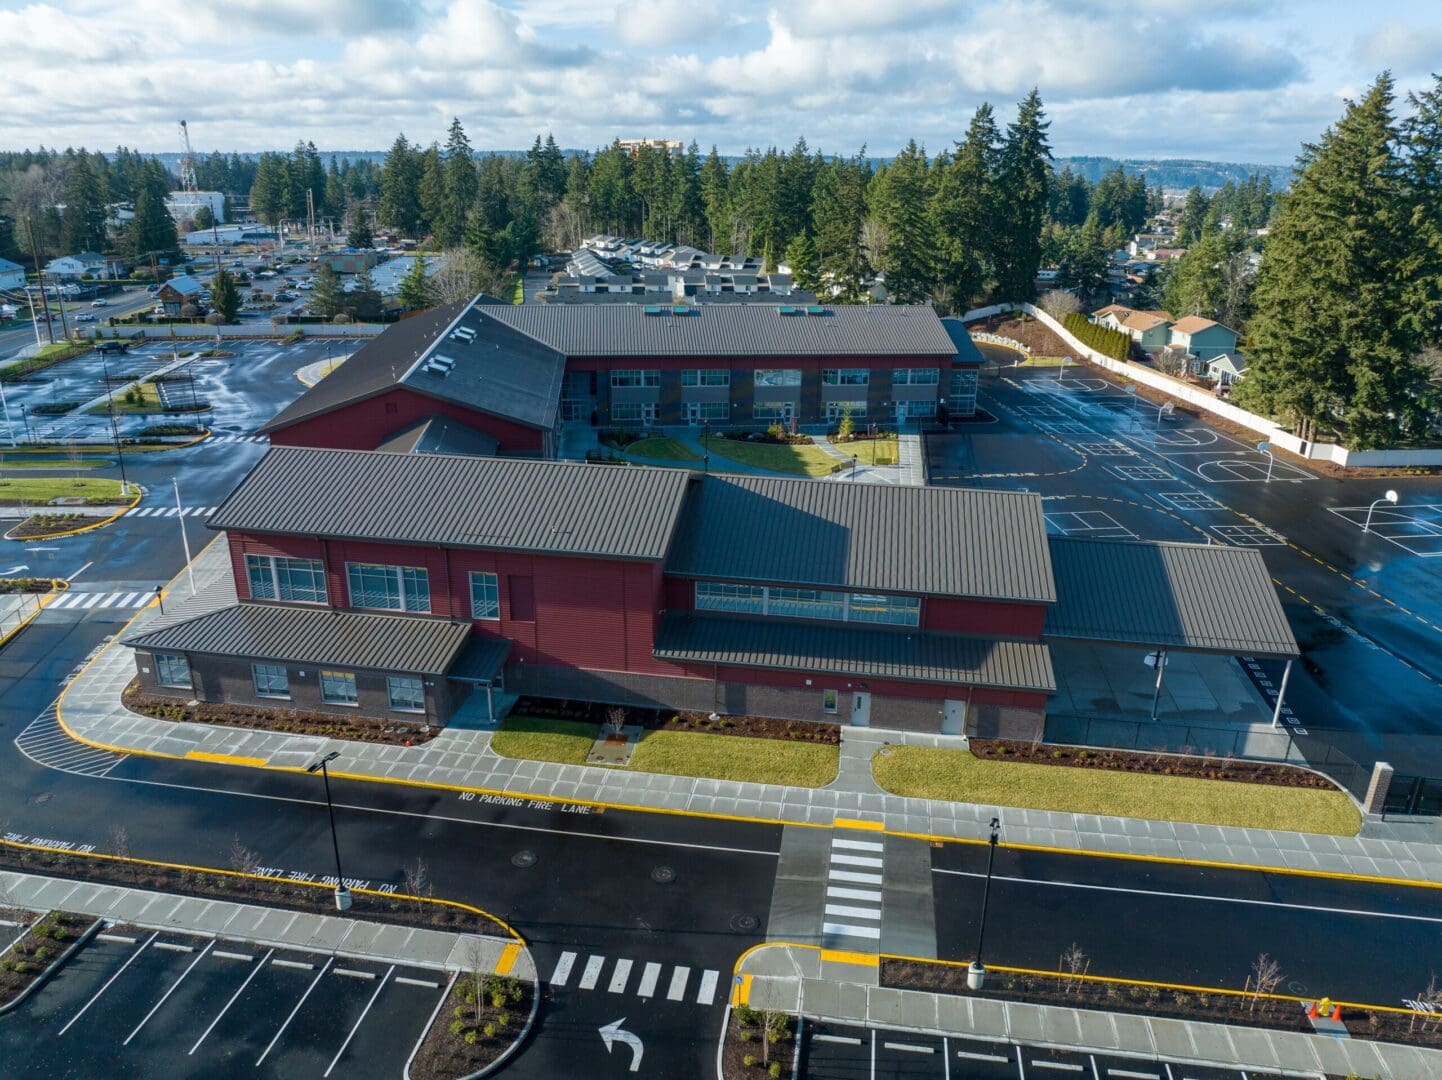 An aerial view of a school building in a parking lot.